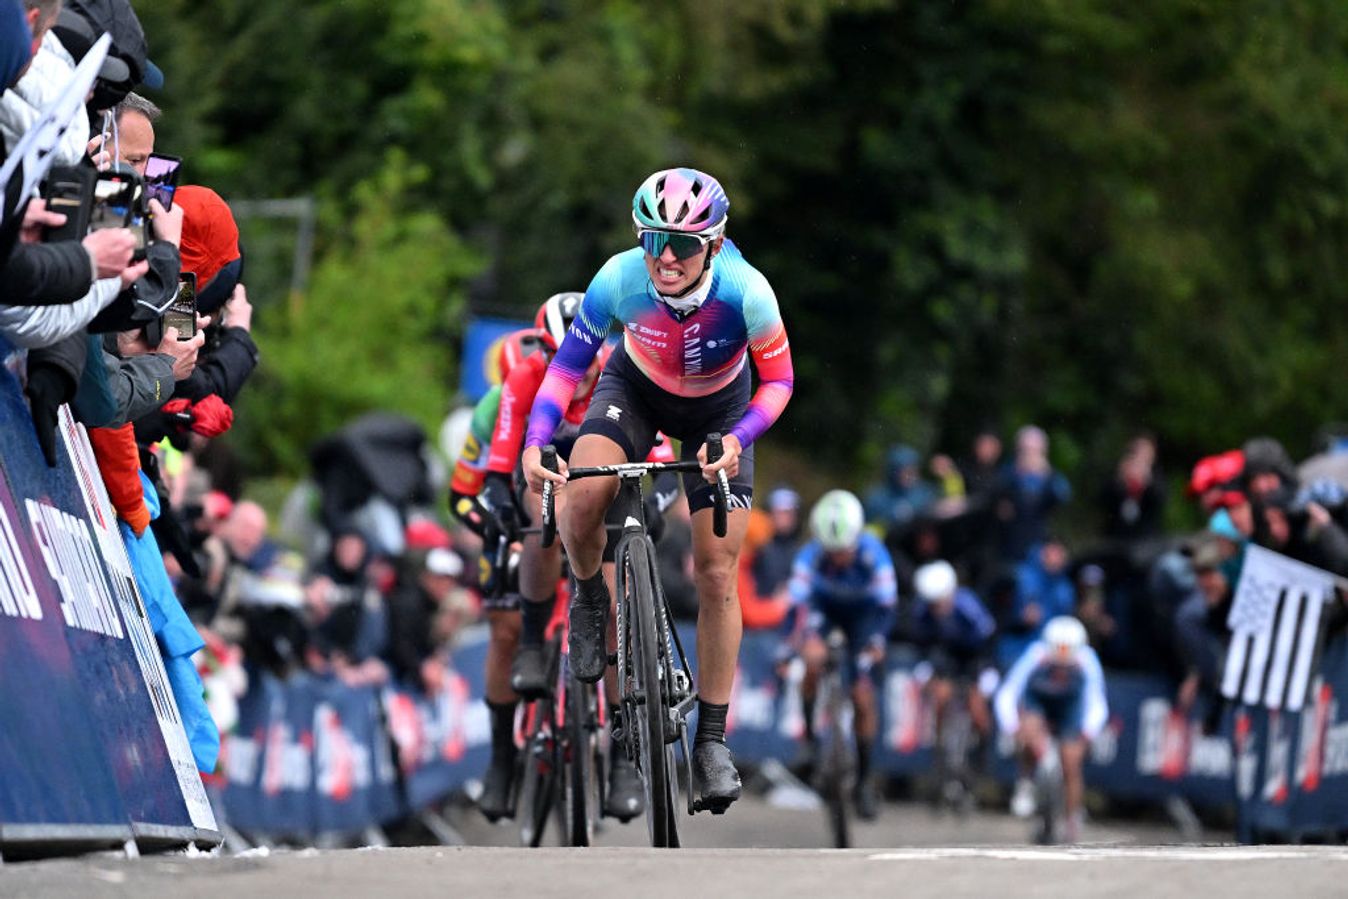 Kasia Niewiadoma climbed to victory in Flèche Wallonne on Wednesday